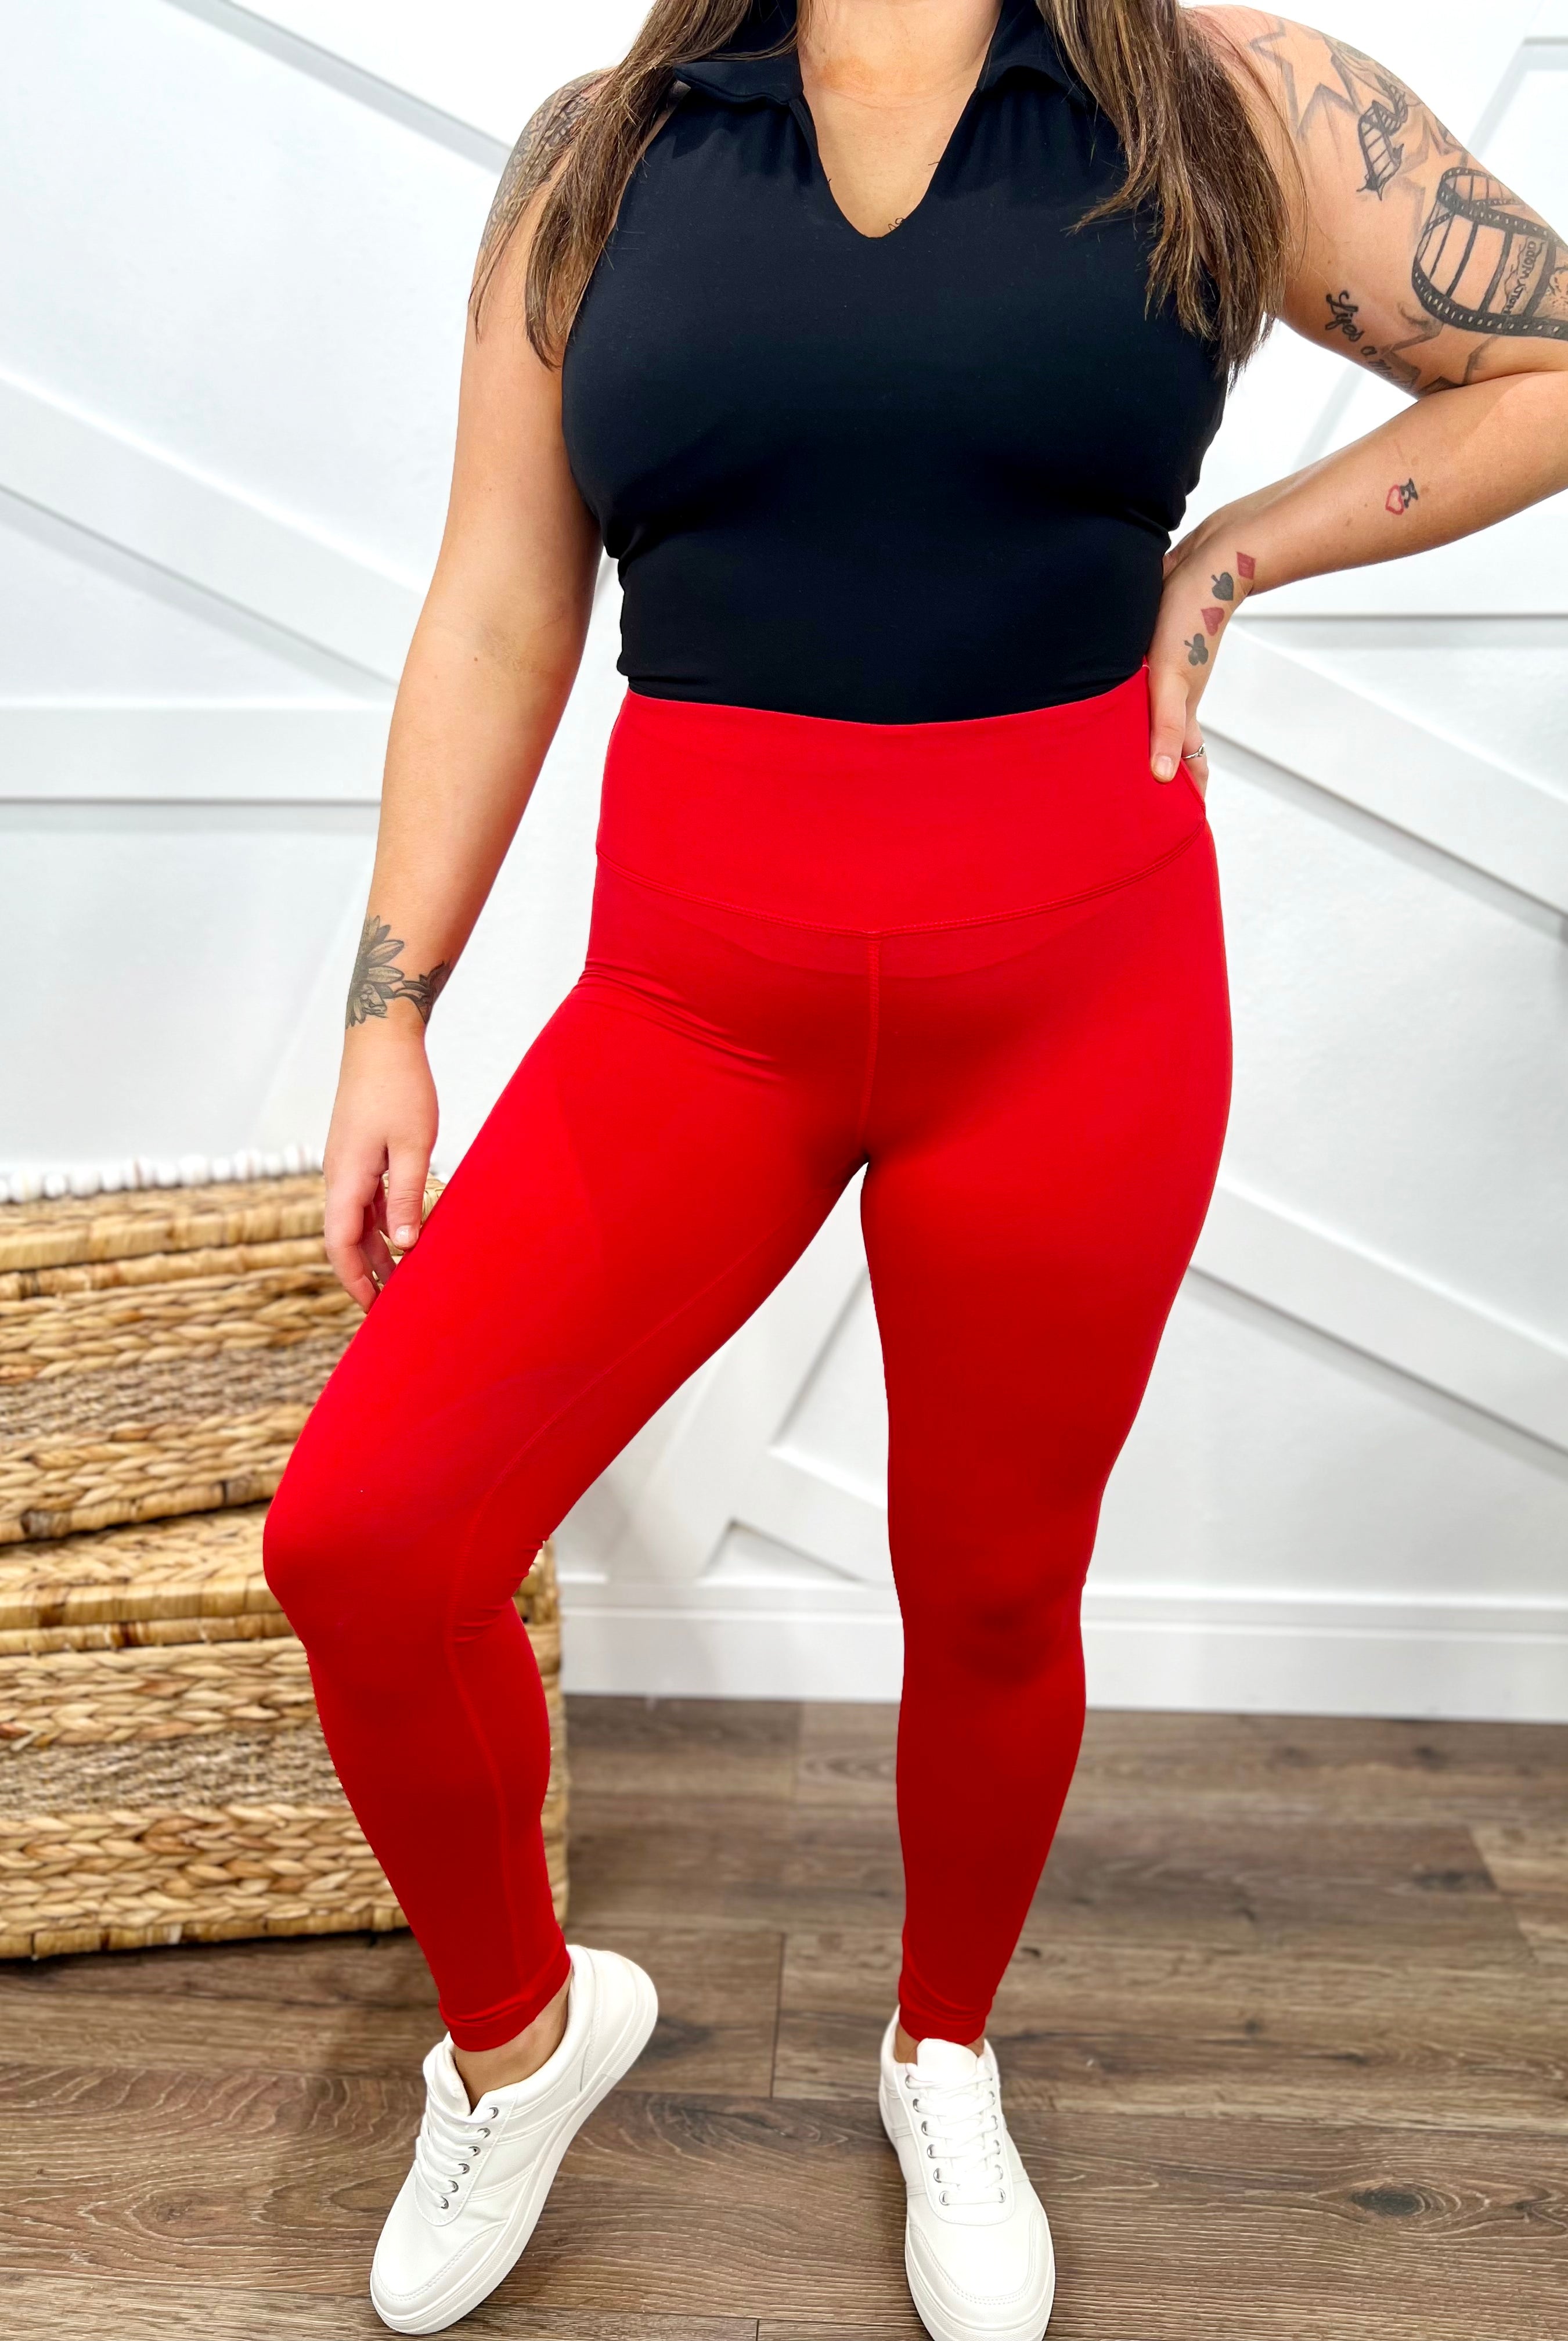 Basics Are Best Leggings-180 LEGGINGS-Rae Mode-Heathered Boho Boutique, Women's Fashion and Accessories in Palmetto, FL